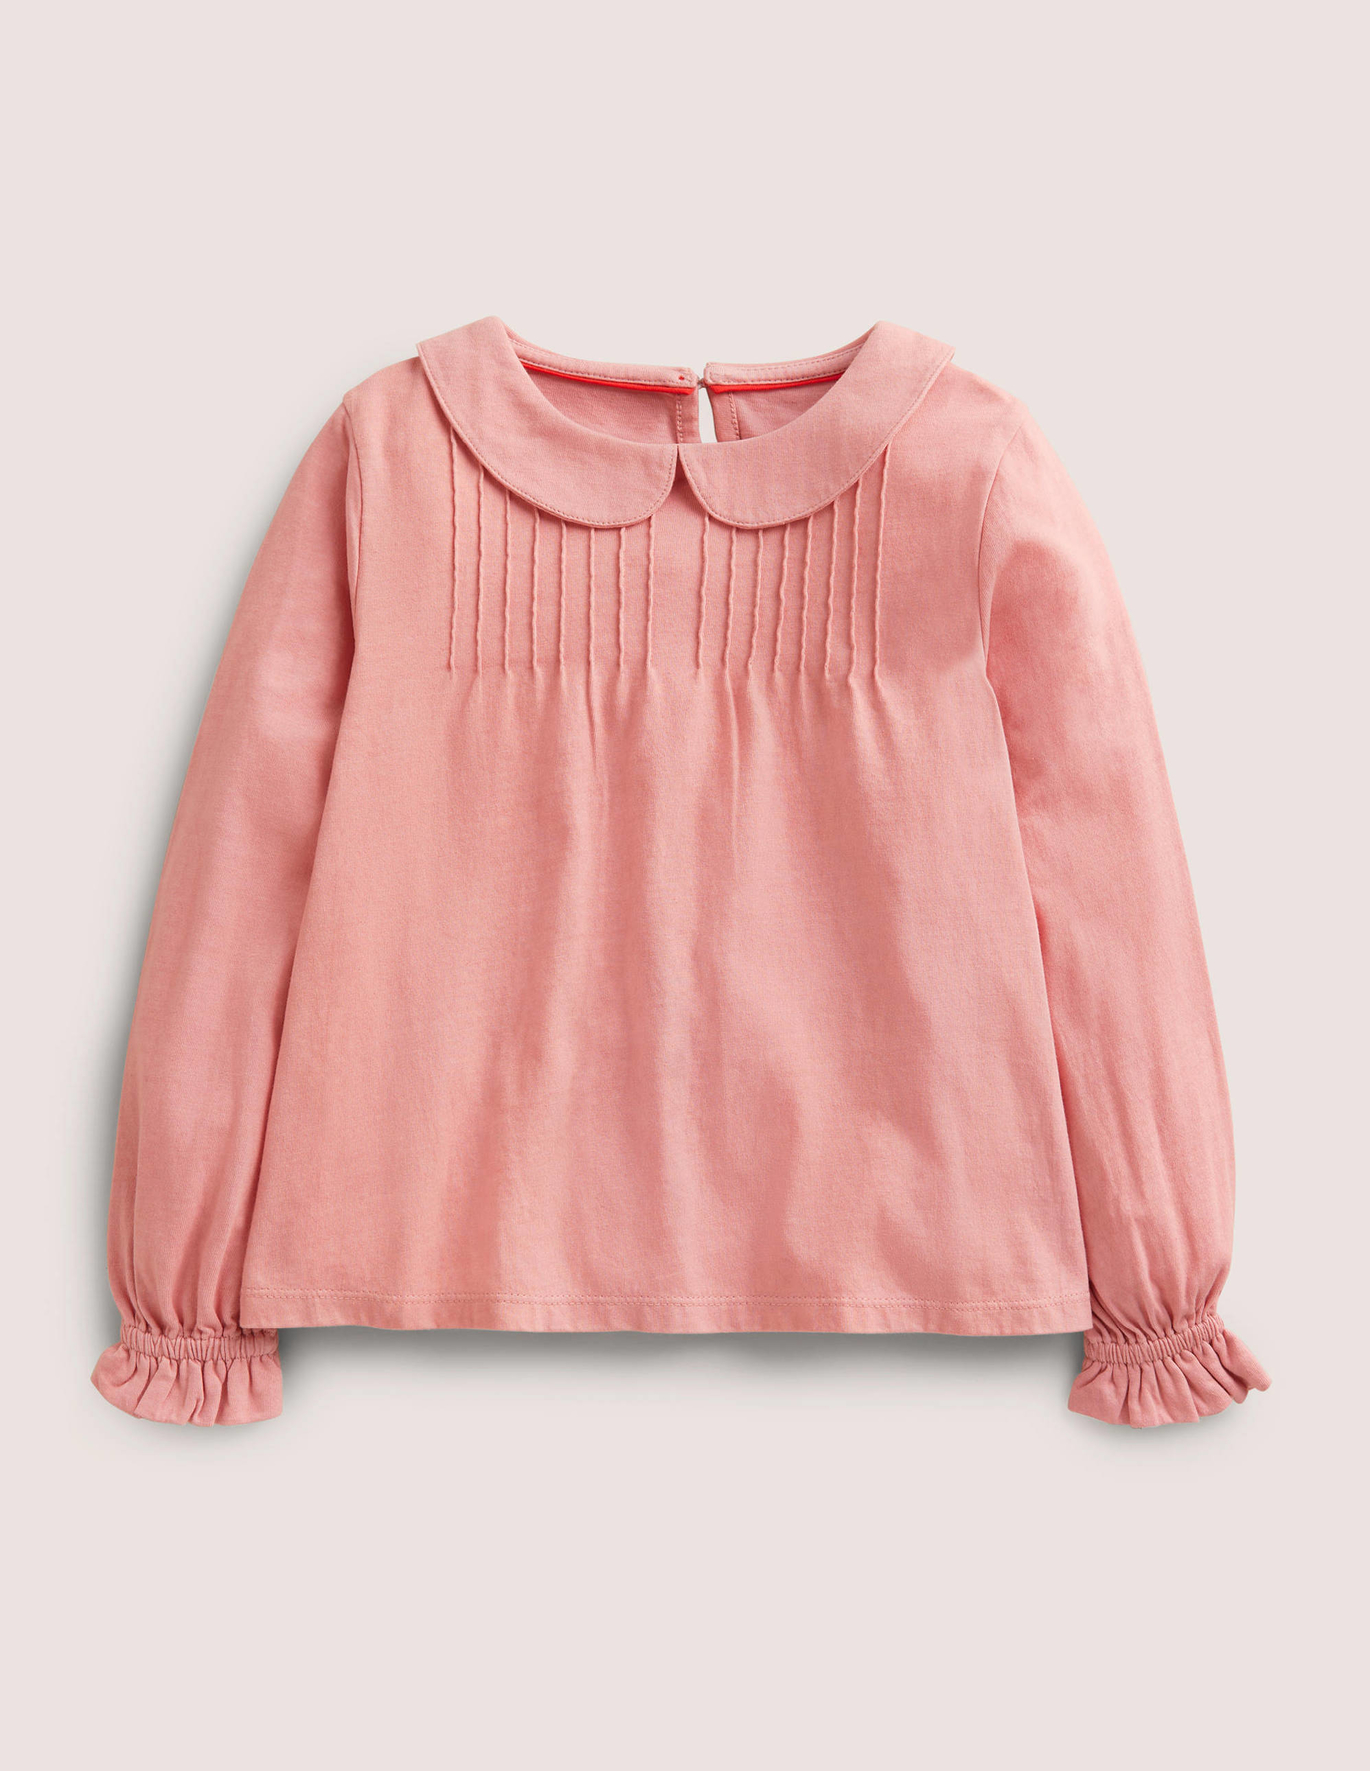 Boden Collared Jersey Top - Almond Pink